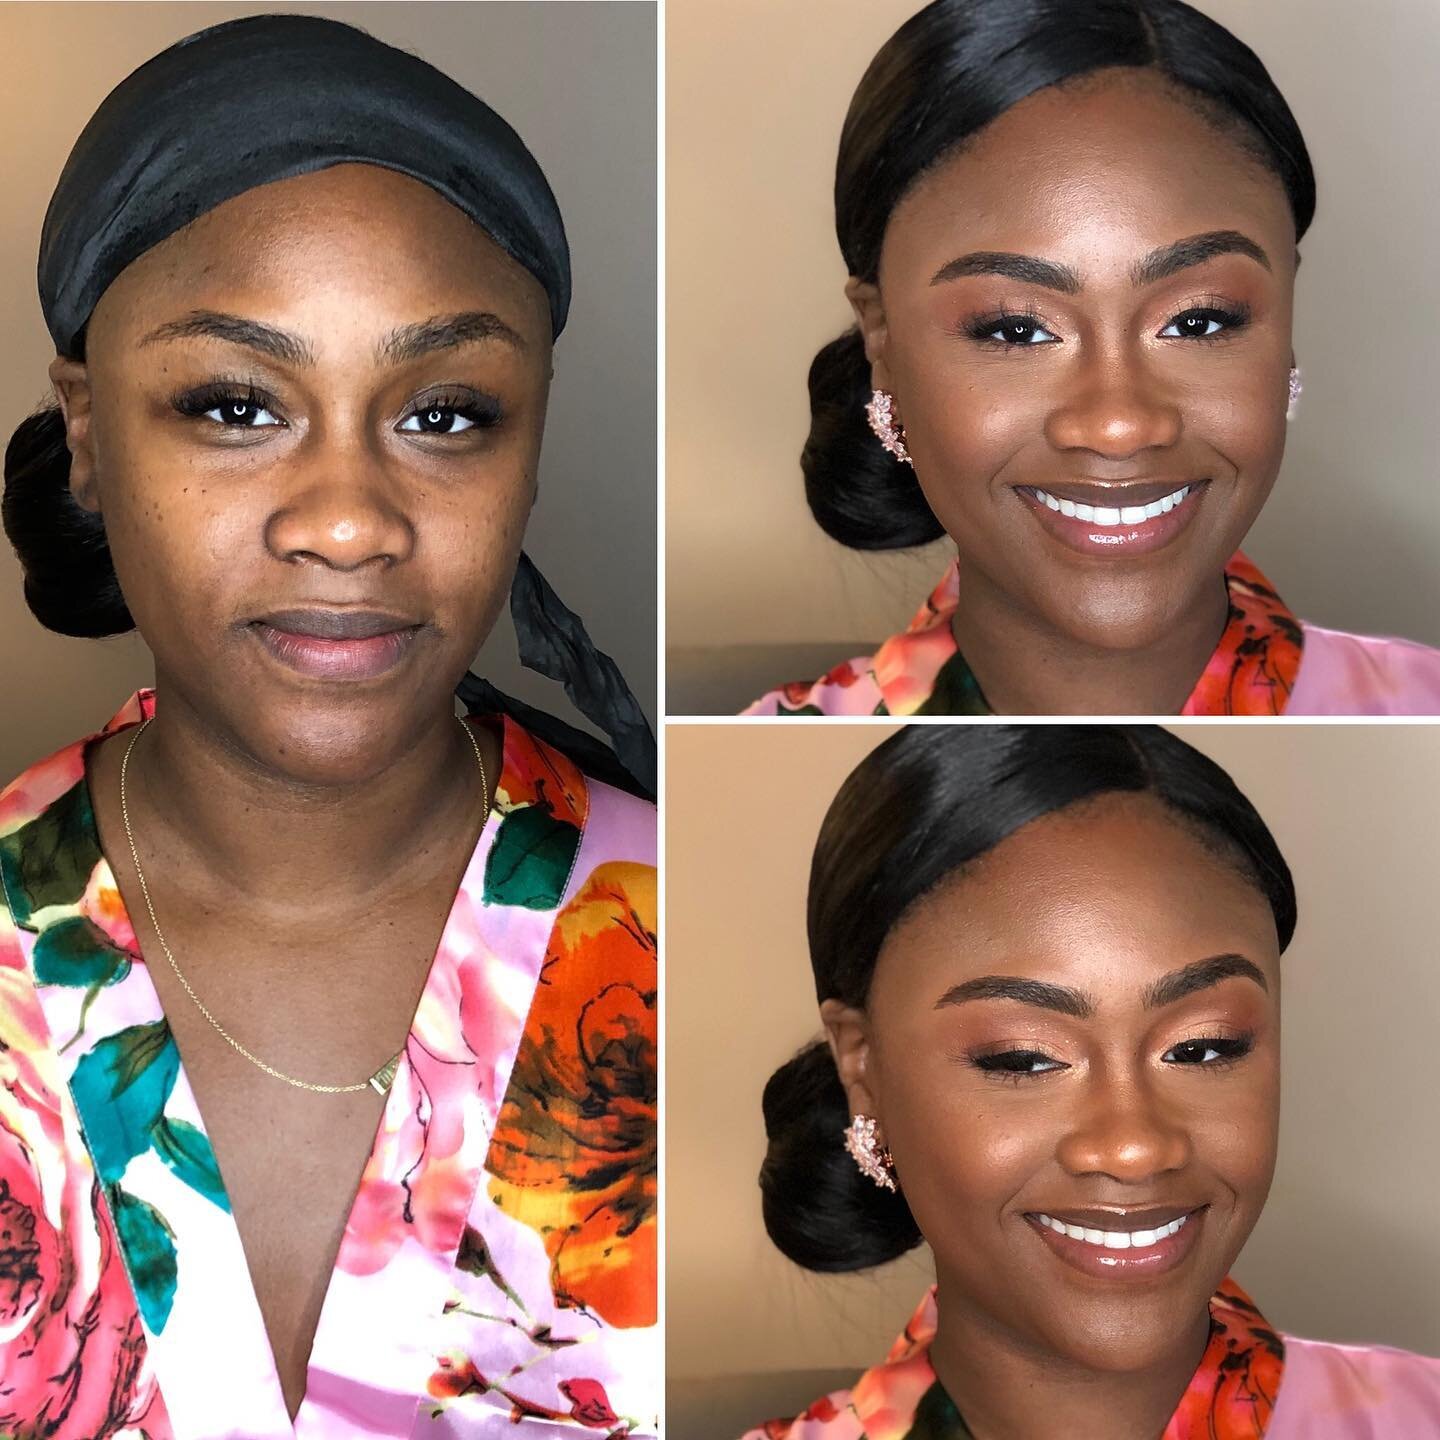 Let&rsquo;s talk bridal party makeup!! My all time favorite bridesmaid look is soft glam, neutral colors with a touch of sparkle. The goal is to let the bride shine, while also being a 🔥 representation of her!
&bull;&bull;&bull;
I LIVE for a polishe